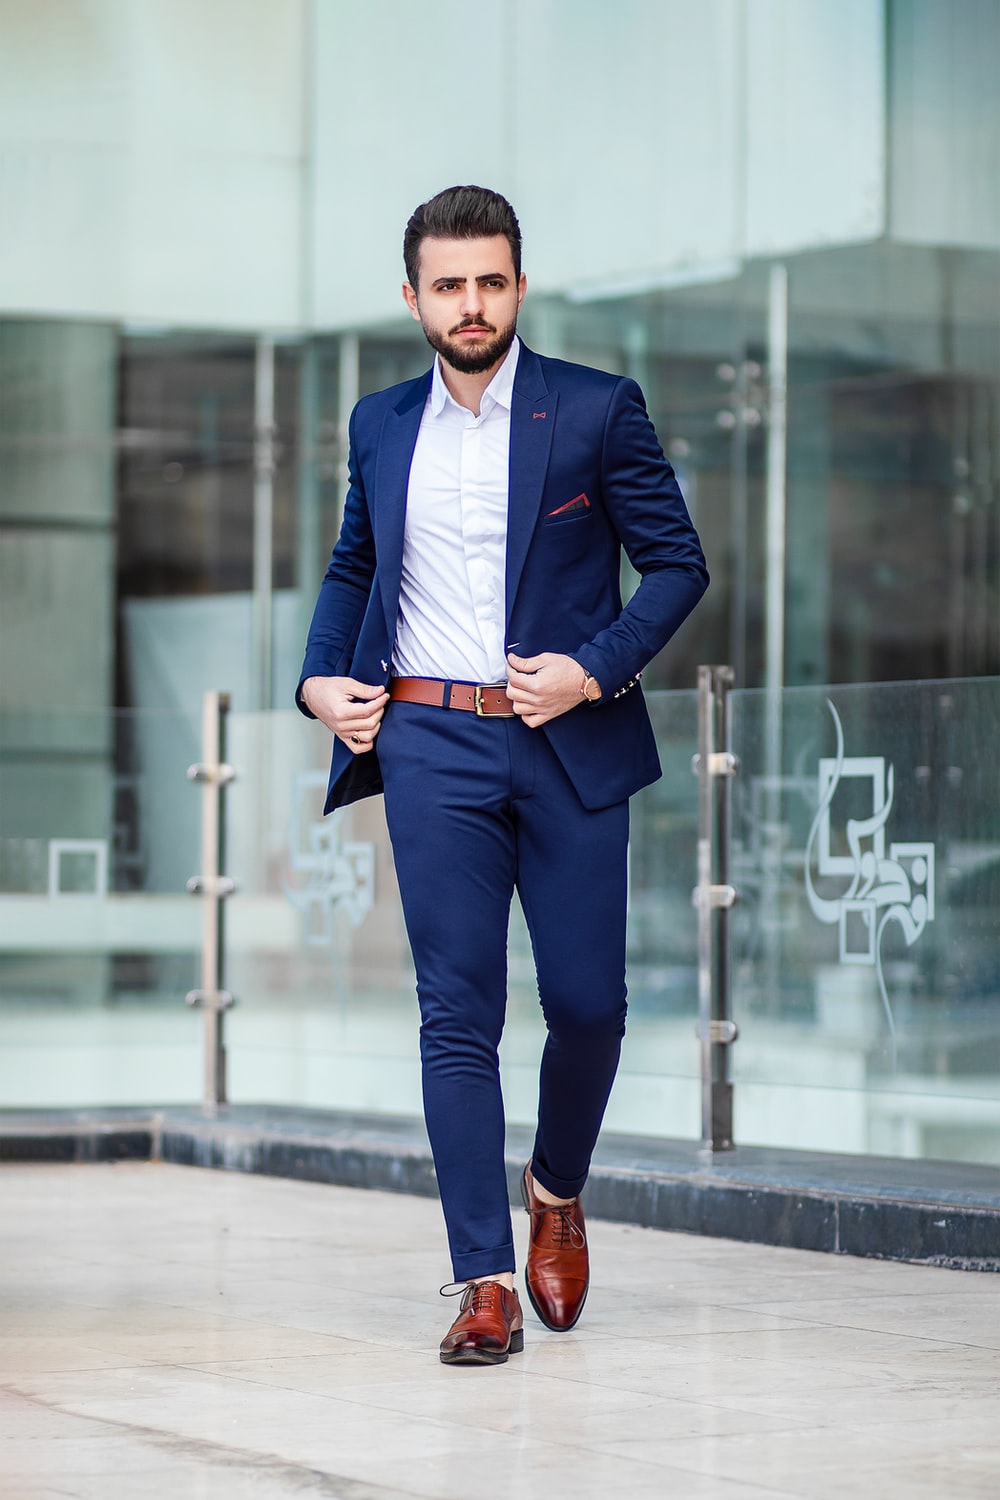 Mens Fashion Picture [HD]. Download Free Image